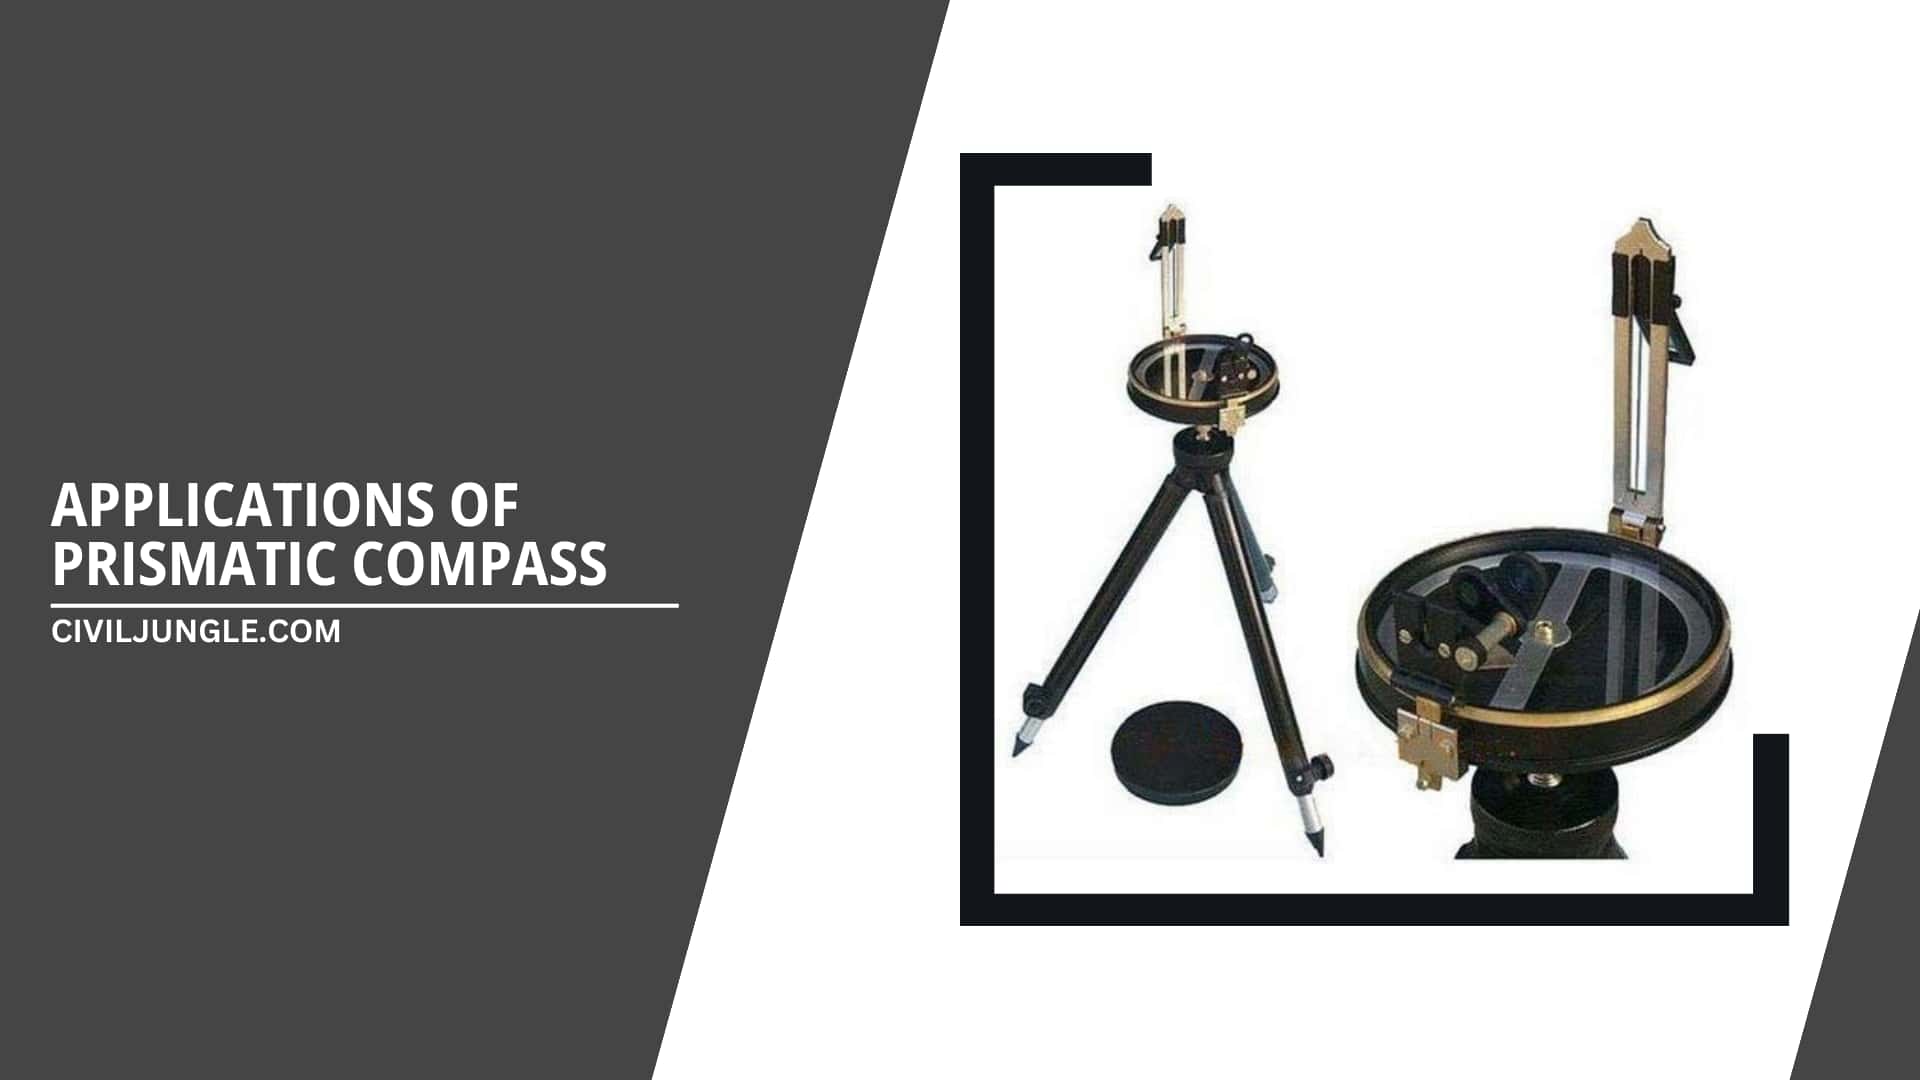 Applications of Prismatic Compass